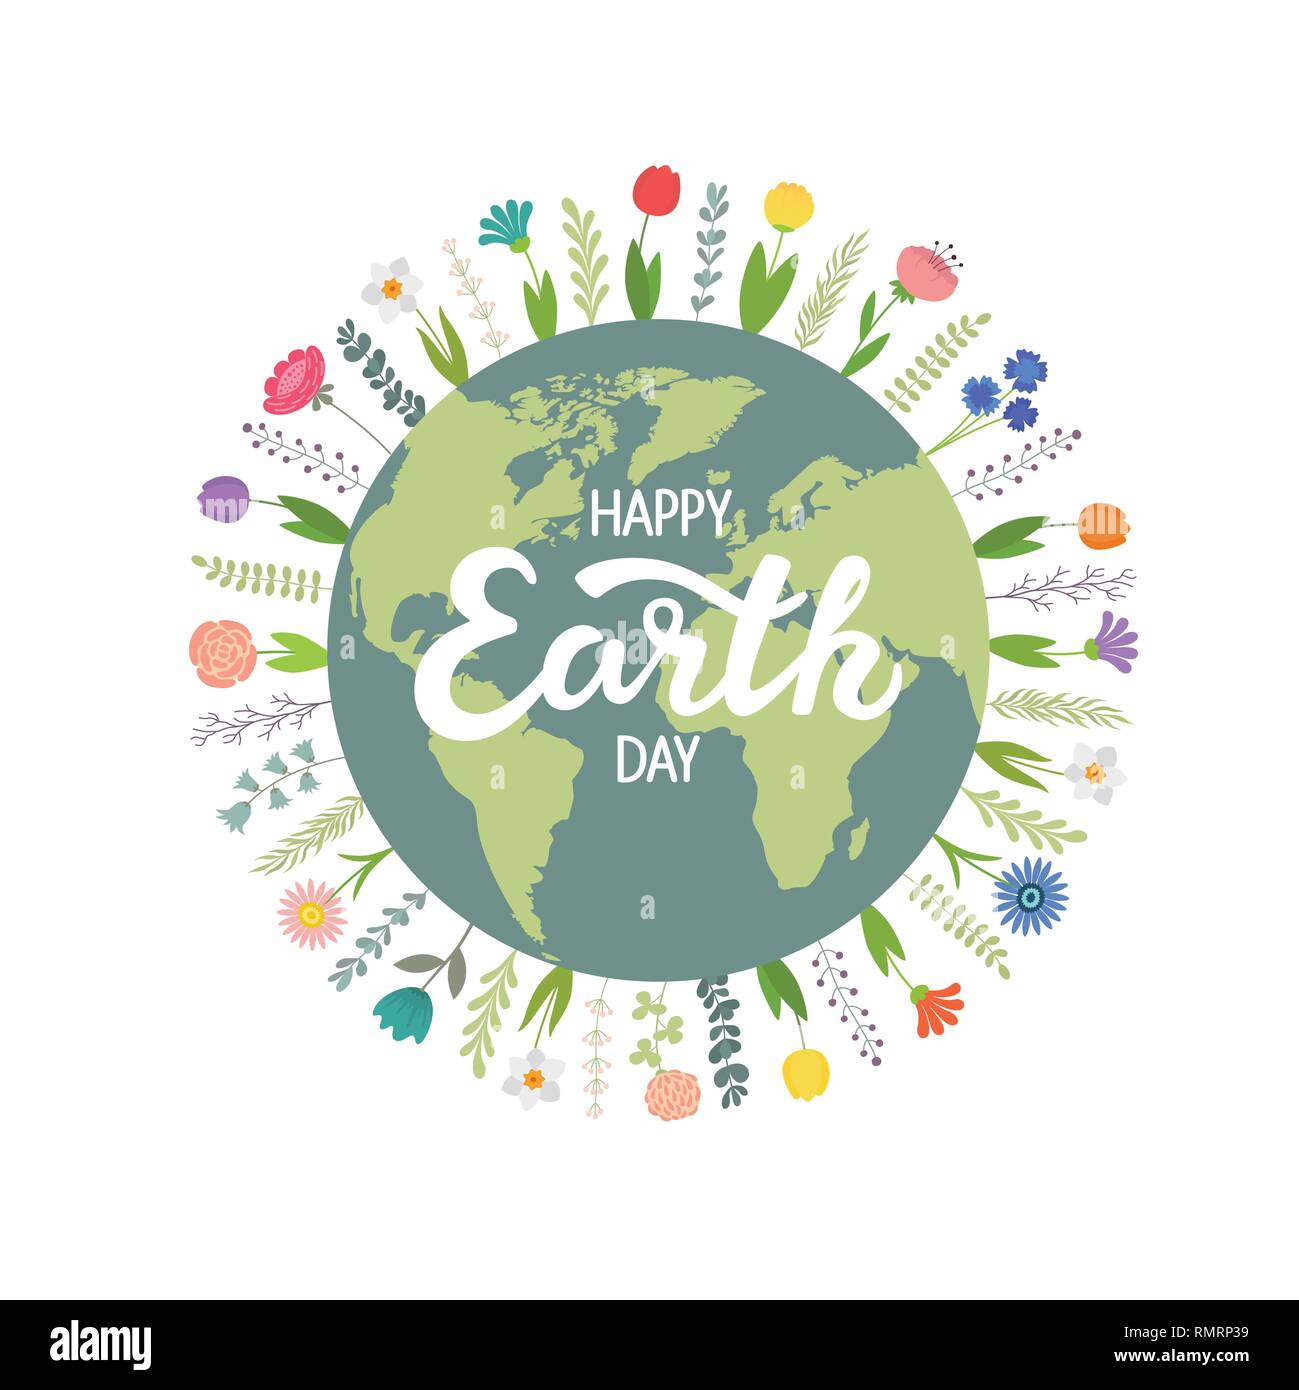 The Earth is surrounded by flowers, Happy Earth Day. Vector illustration on white isolated background Stock Vector